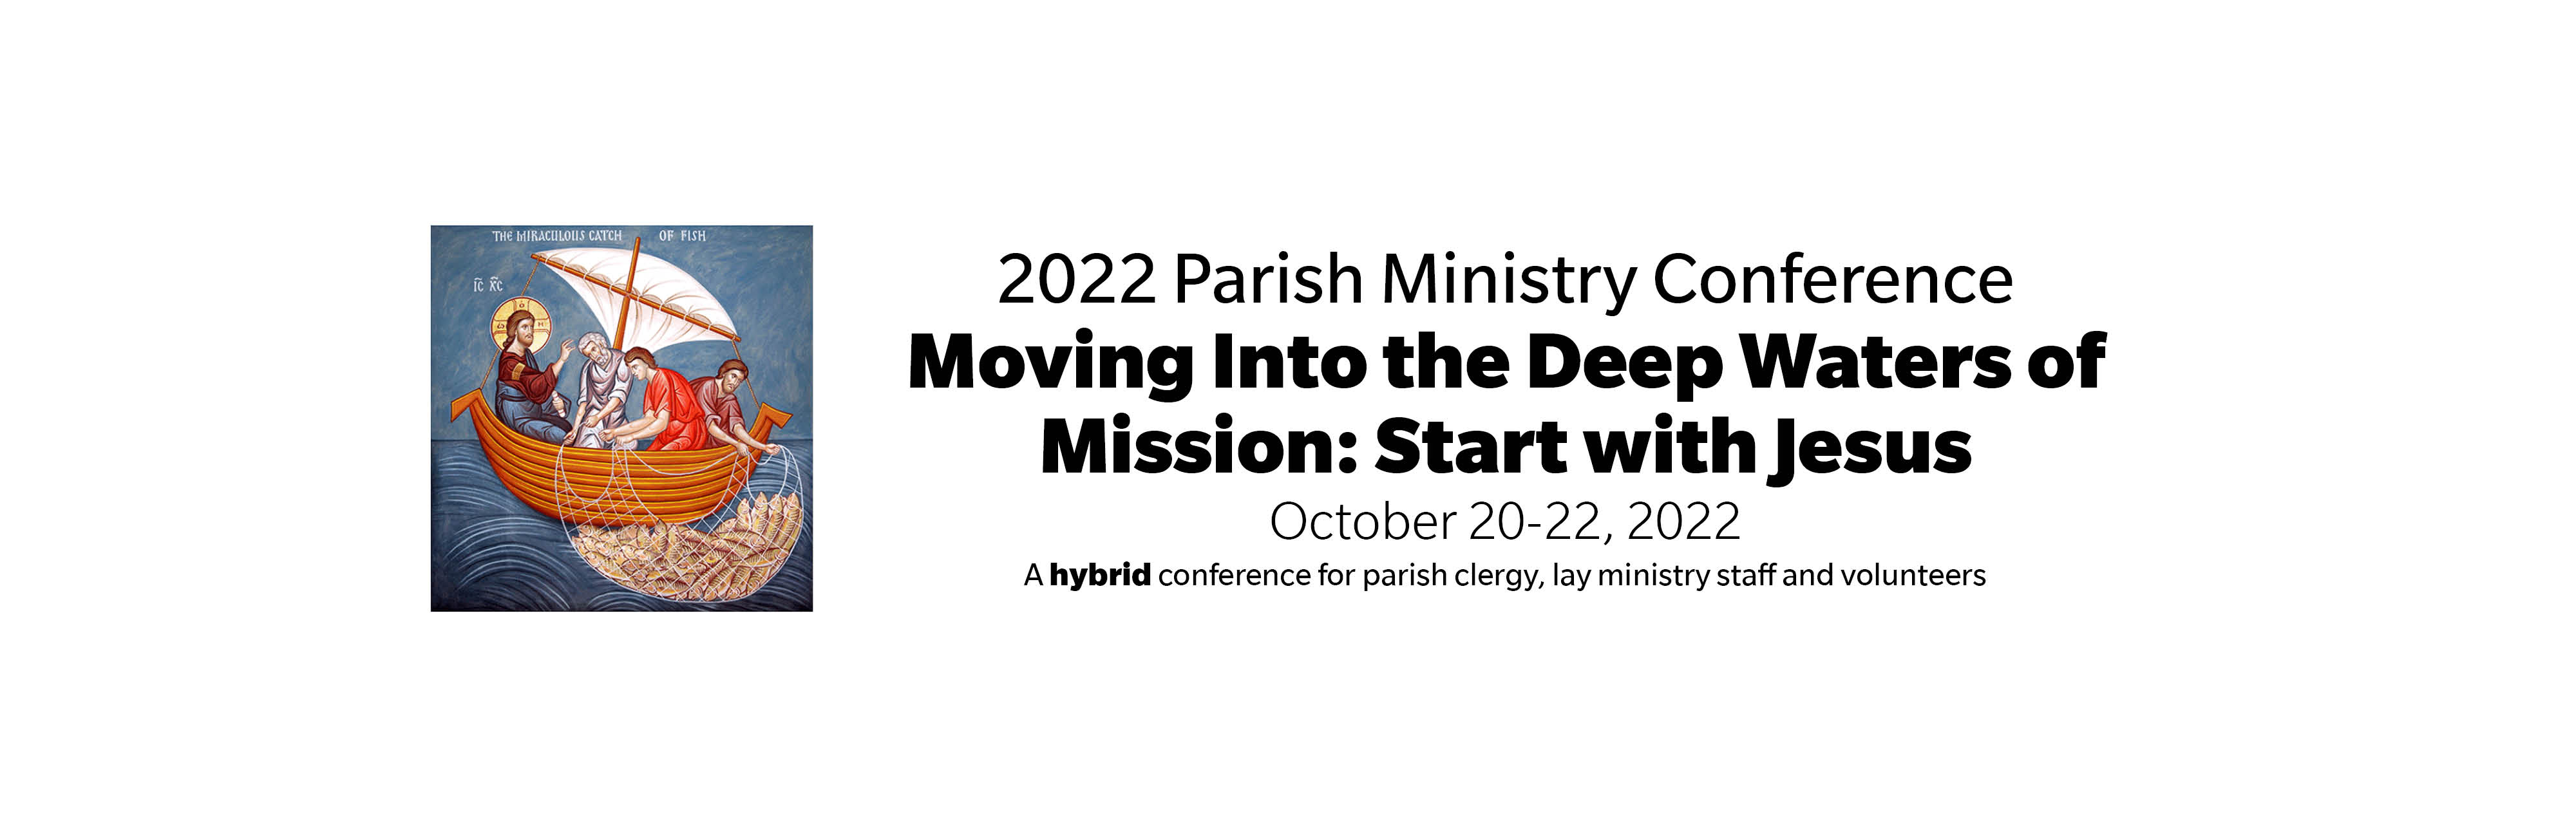 2022 Parish Ministry Conference Banner